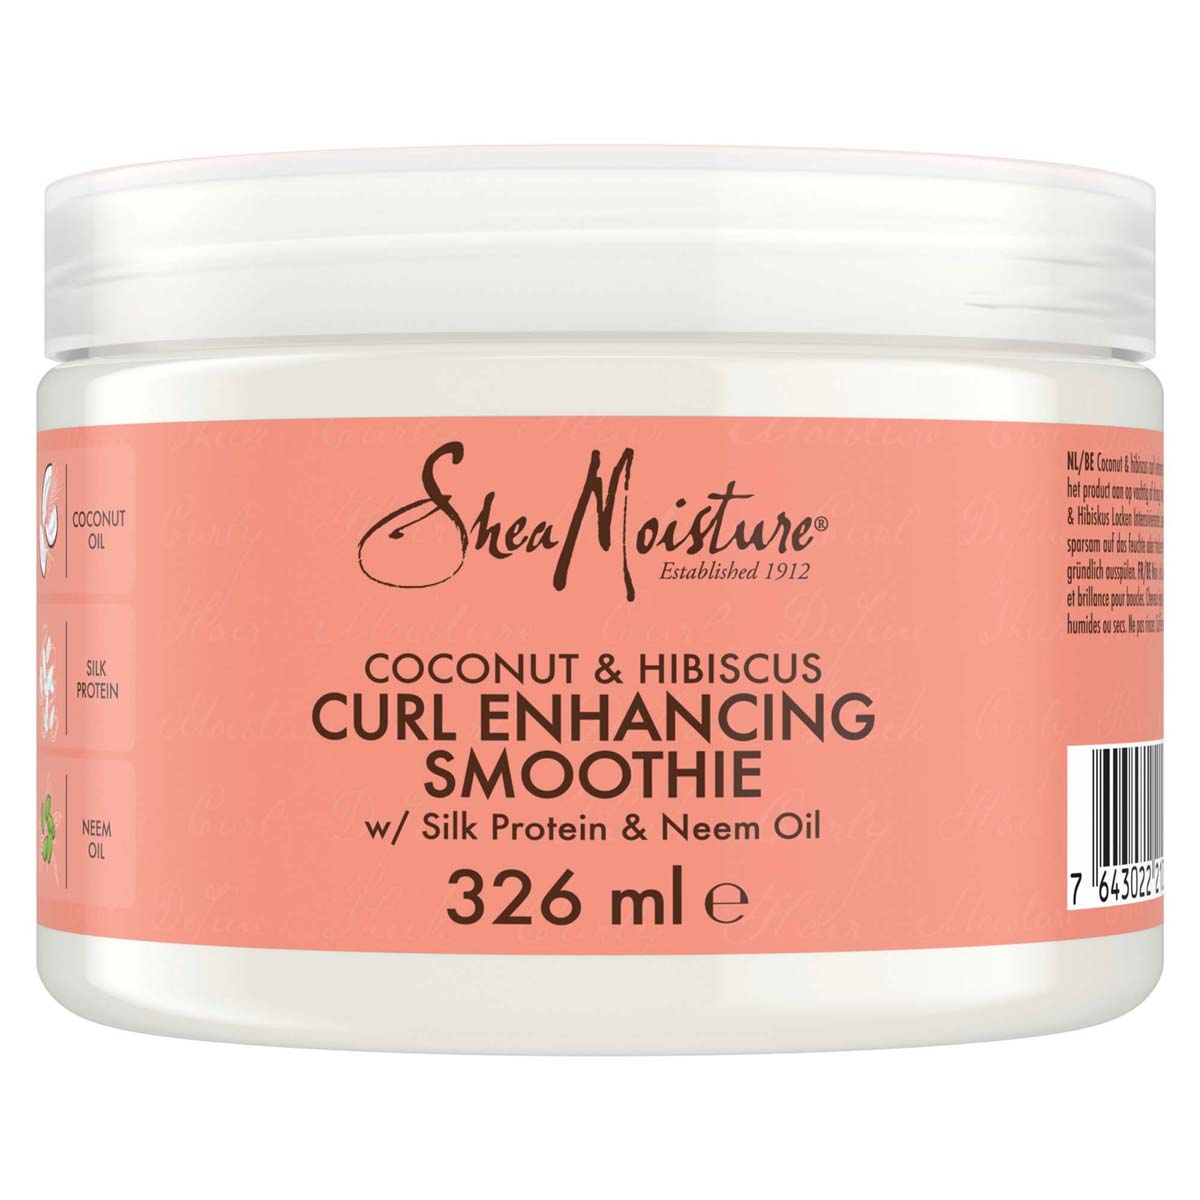 SHEAMOISTURE | Coconut & Hibiscus Curl Enhancing Smoothie